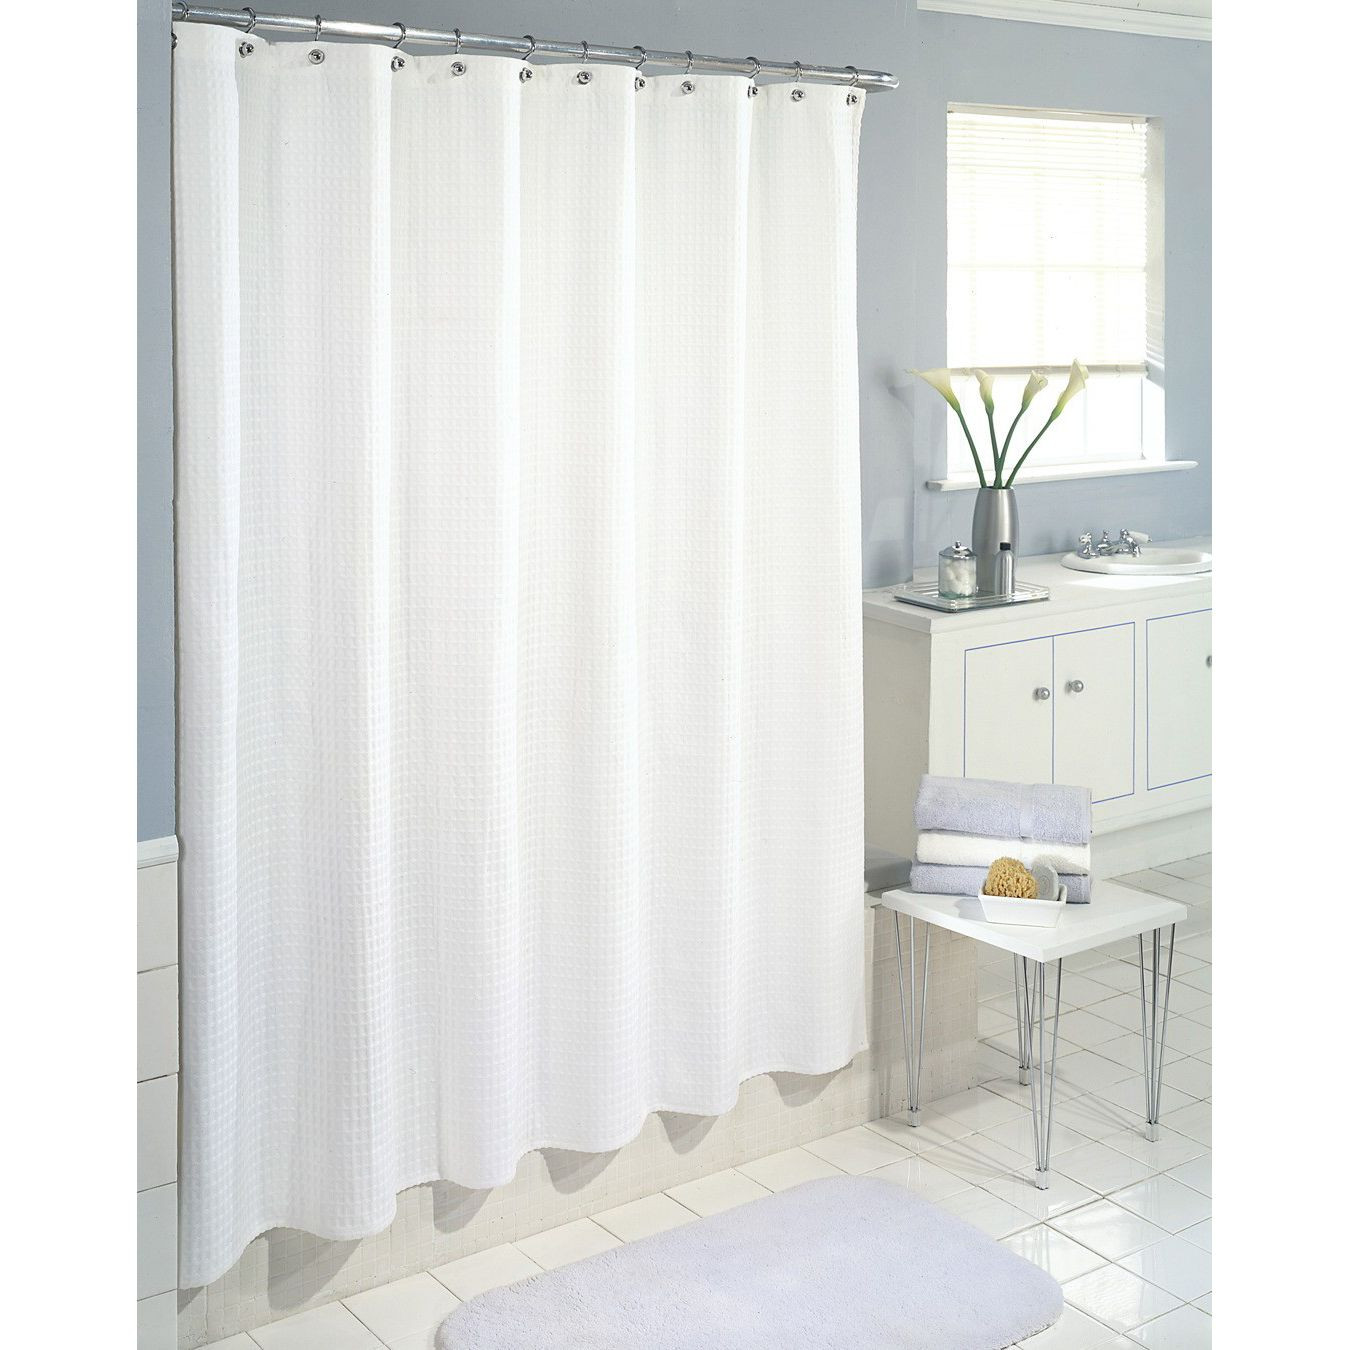 Essential Home Waffle Wave Fabric Shower Curtain - White